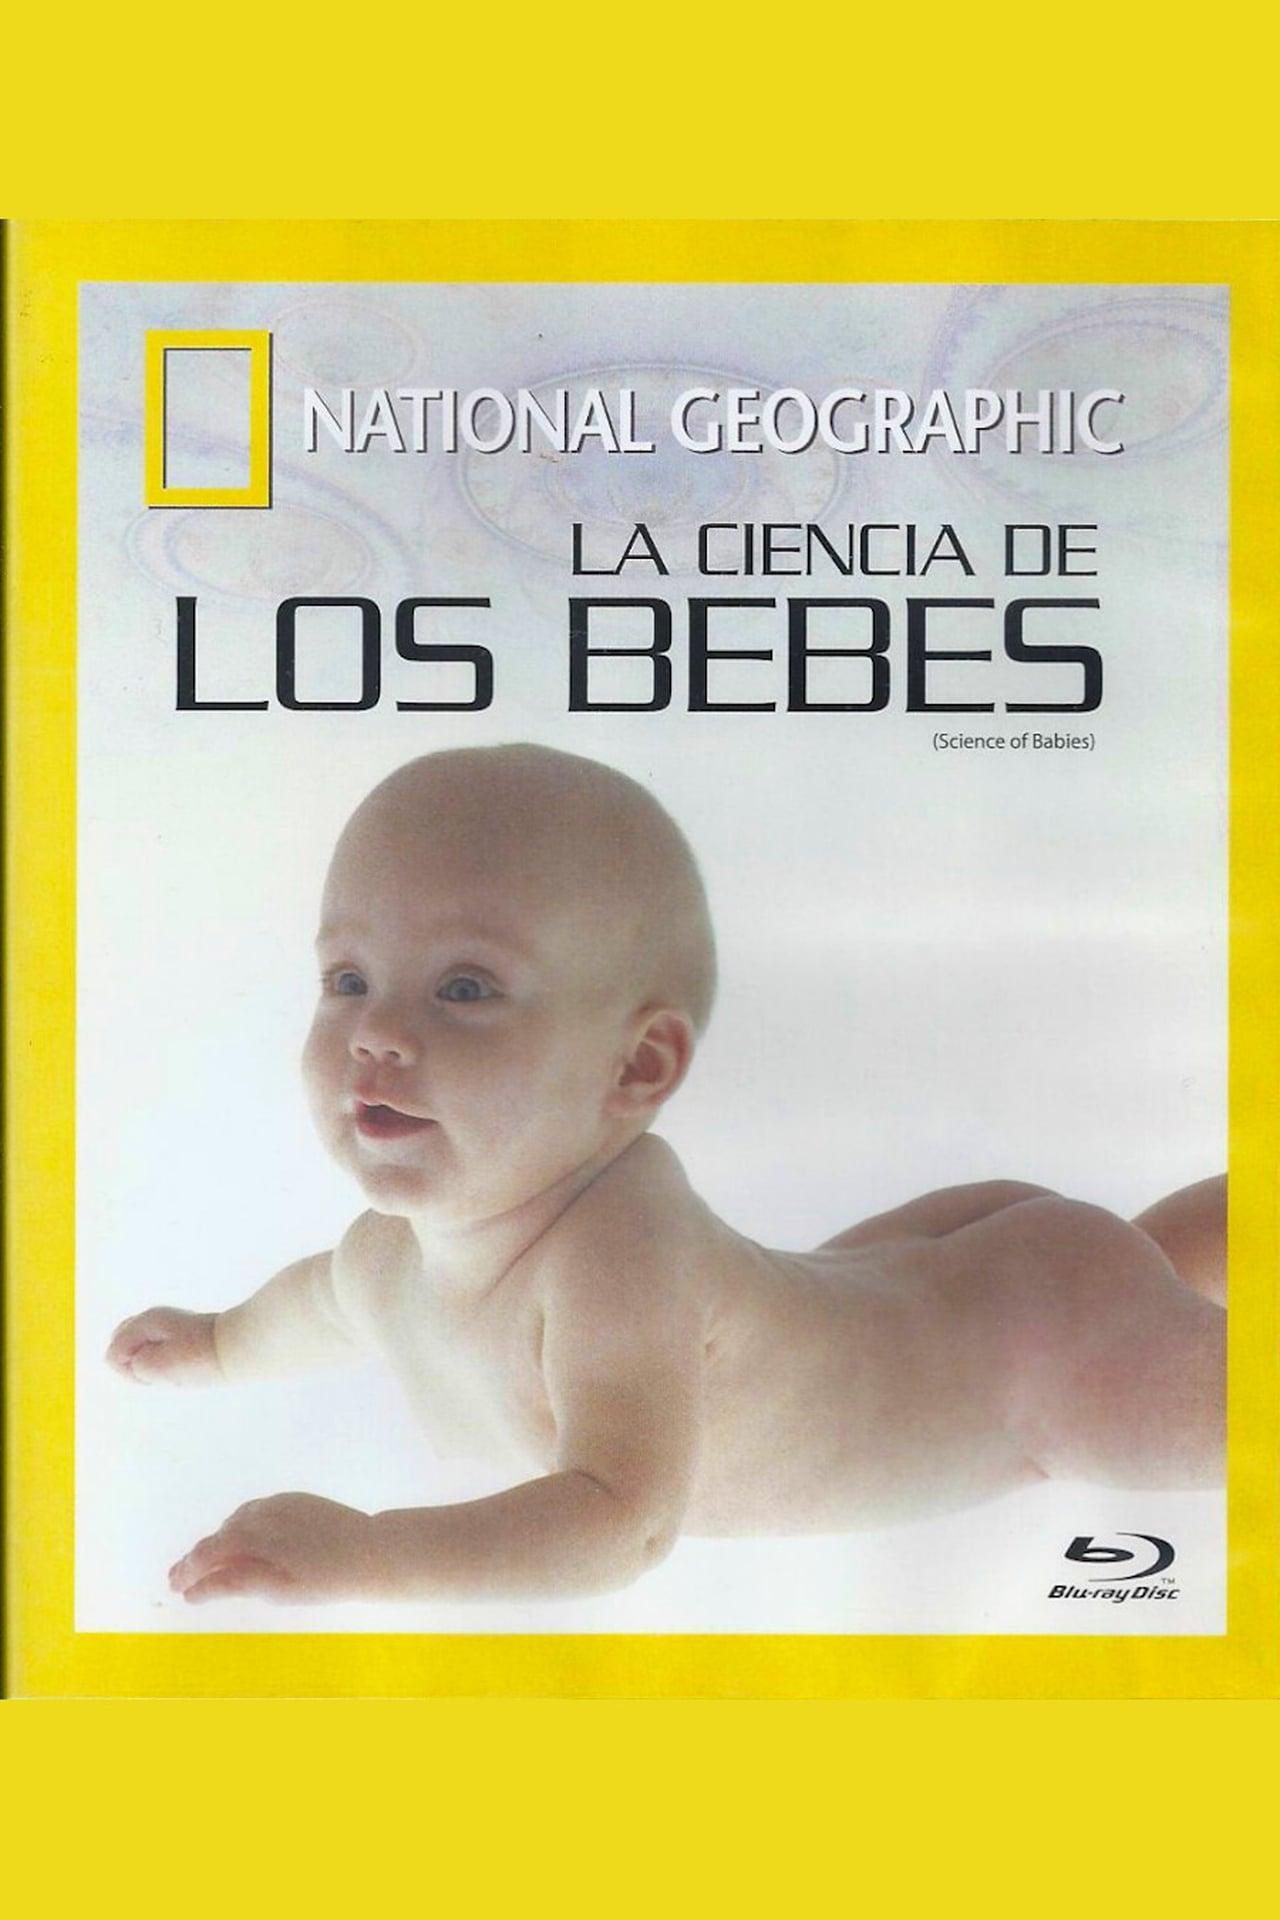 Science of Babies poster